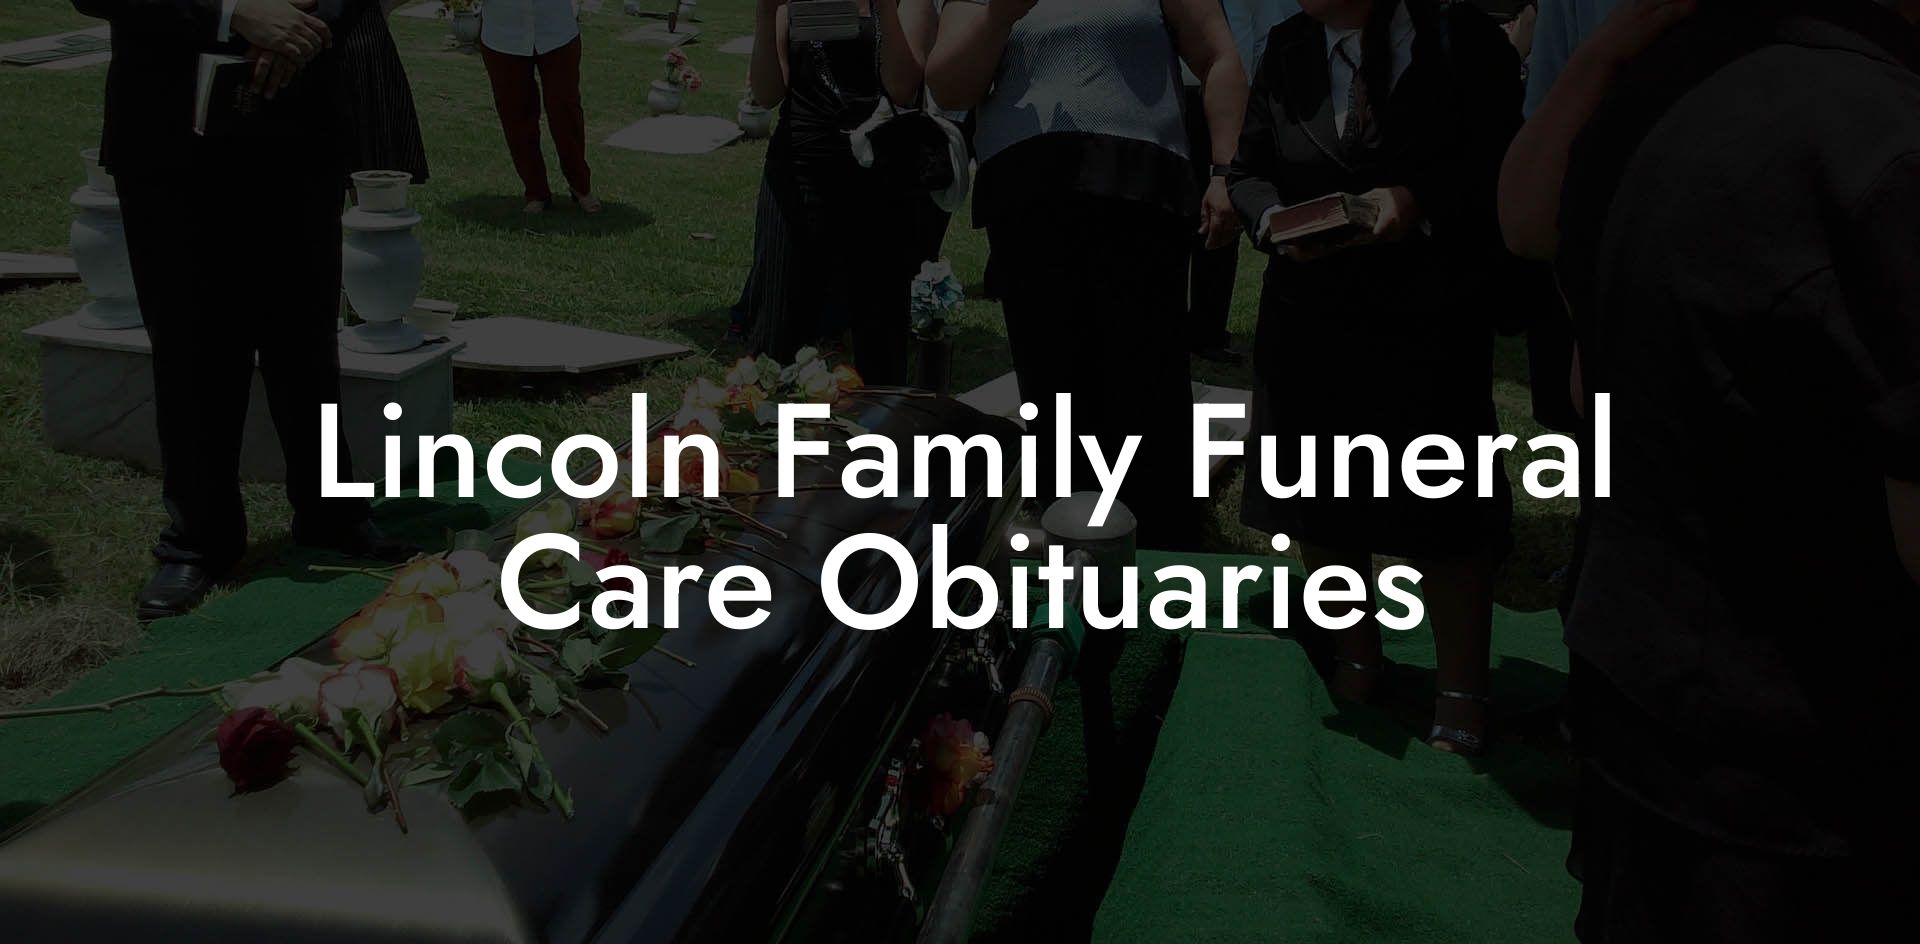 Lincoln Family Funeral Care Obituaries